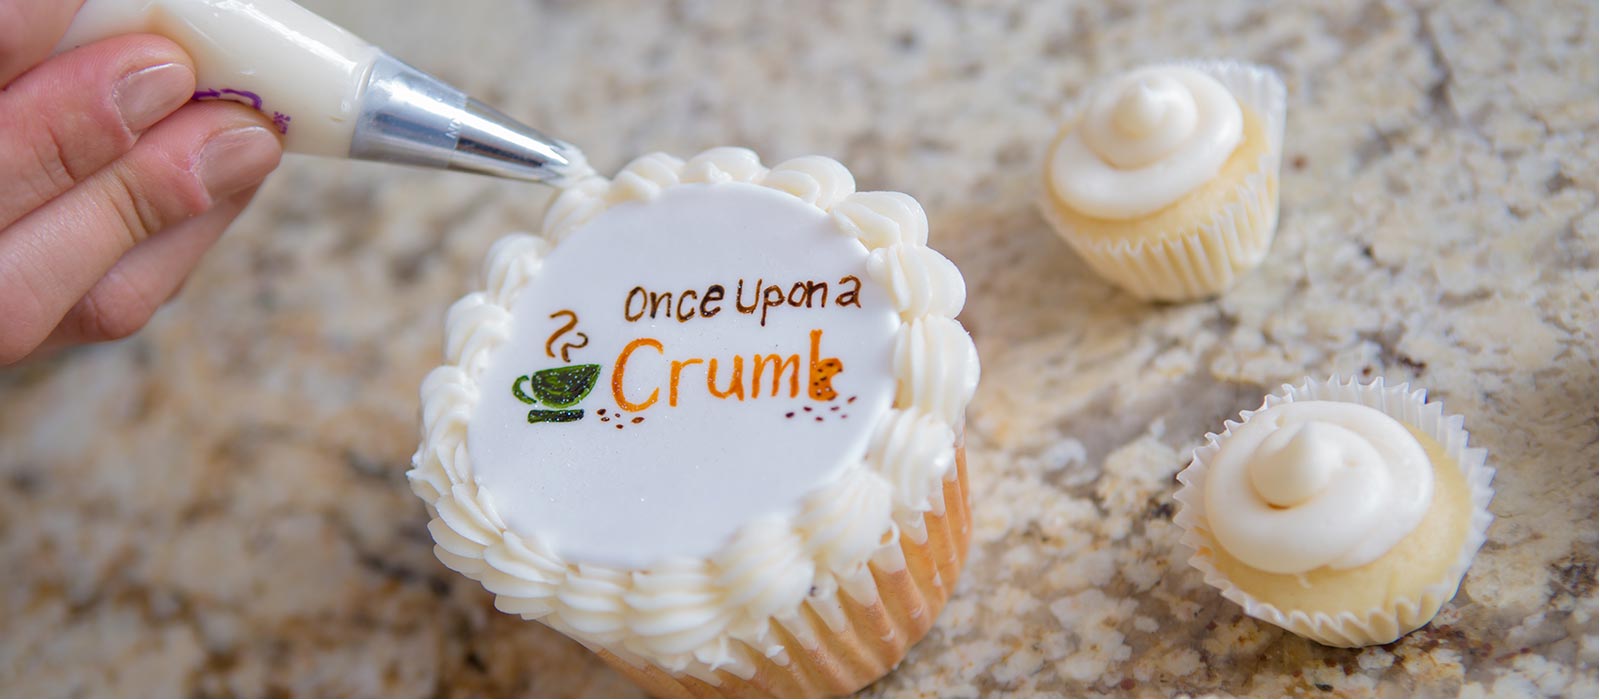 Once Upon A Crumb